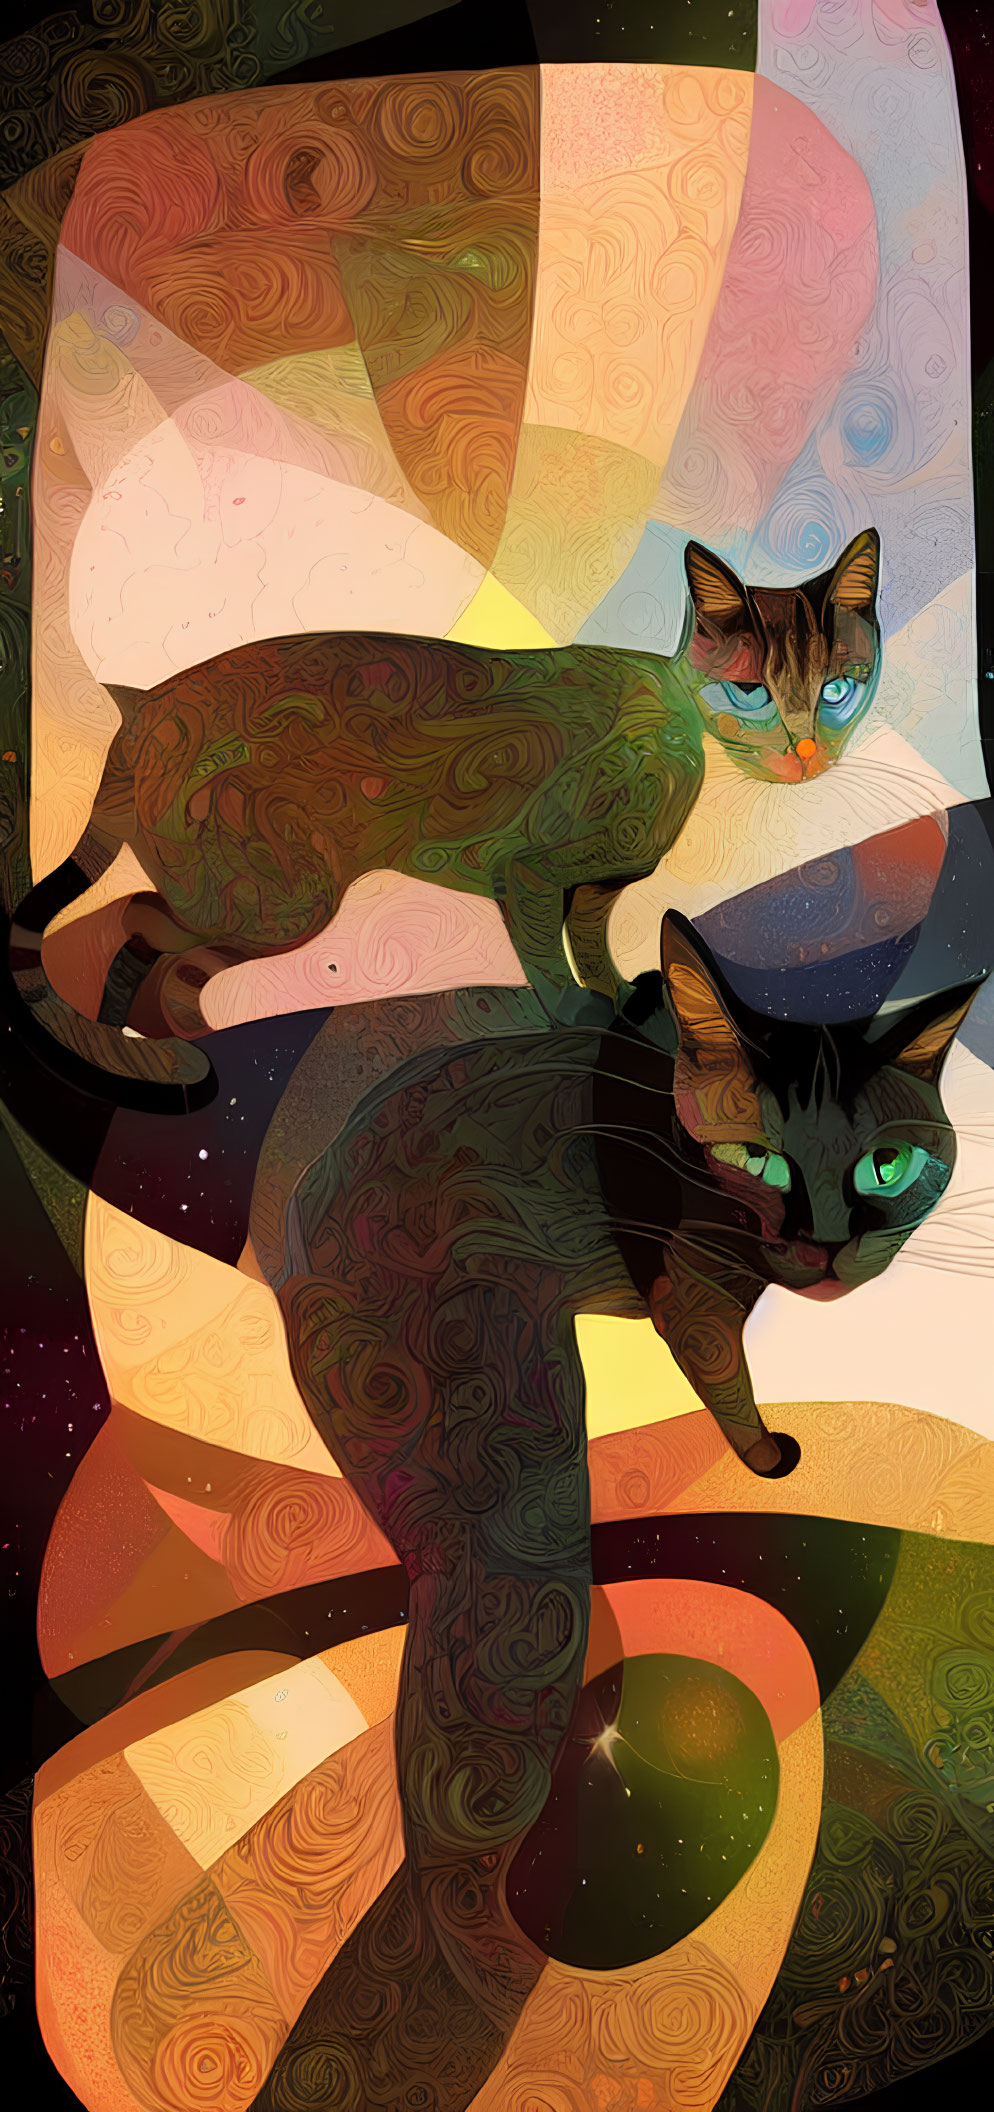 Colorful Abstract Digital Artwork: Stylized Cats with Swirling Patterns